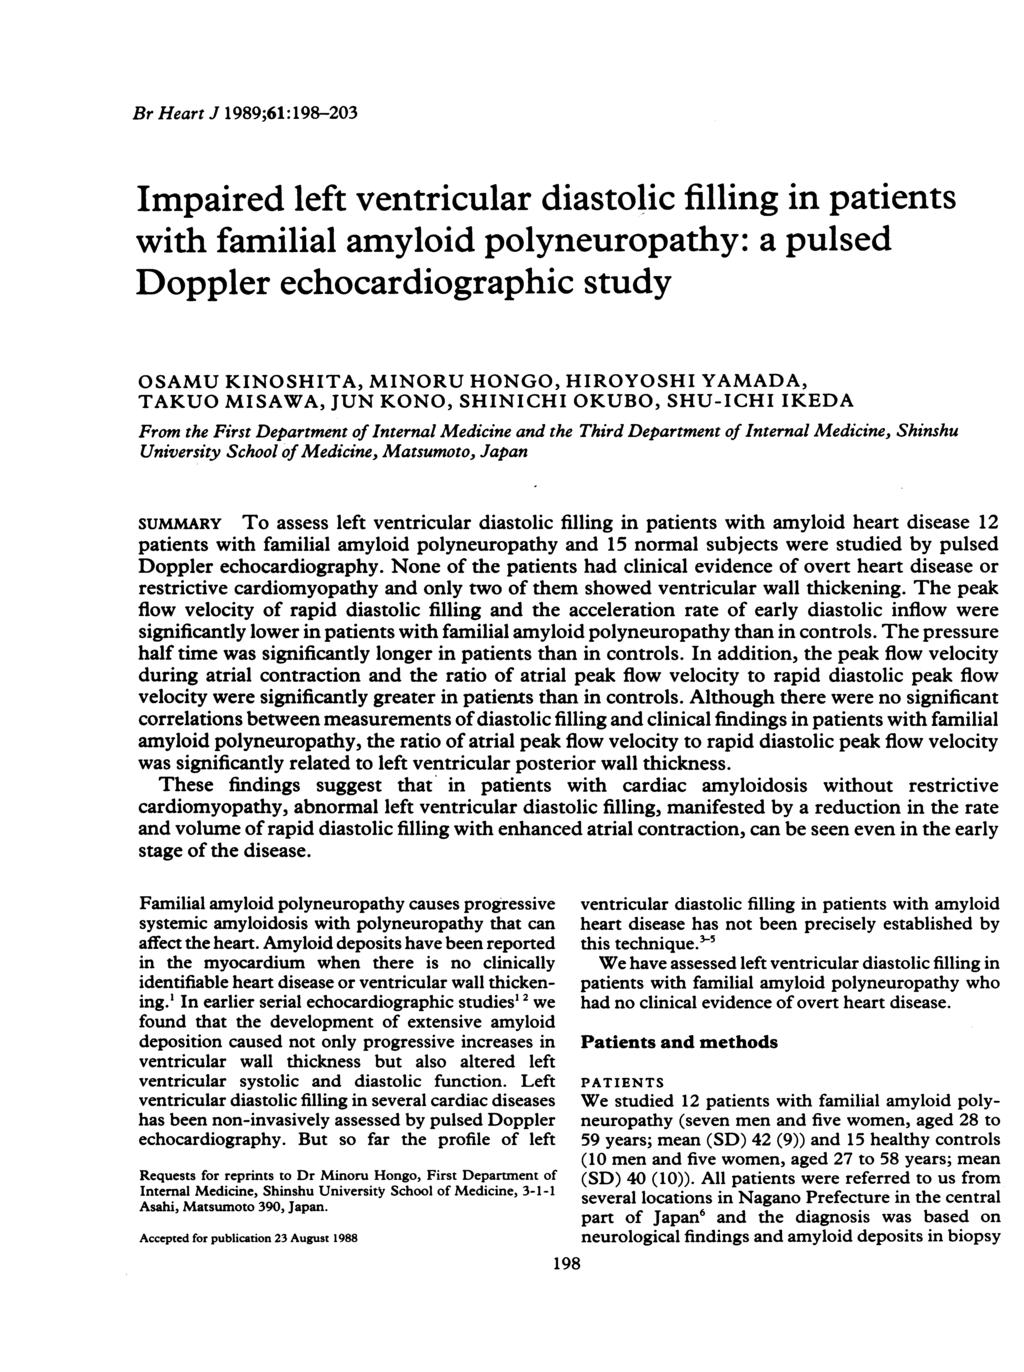 Br Heart J 1989;61:198-23 Impaired left ventricular diastolic filling in patients with familial amyloid polyneuropathy: a pulsed Doppler echocardiographic study OSAMU KINOSHITA, MINORU HONGO,